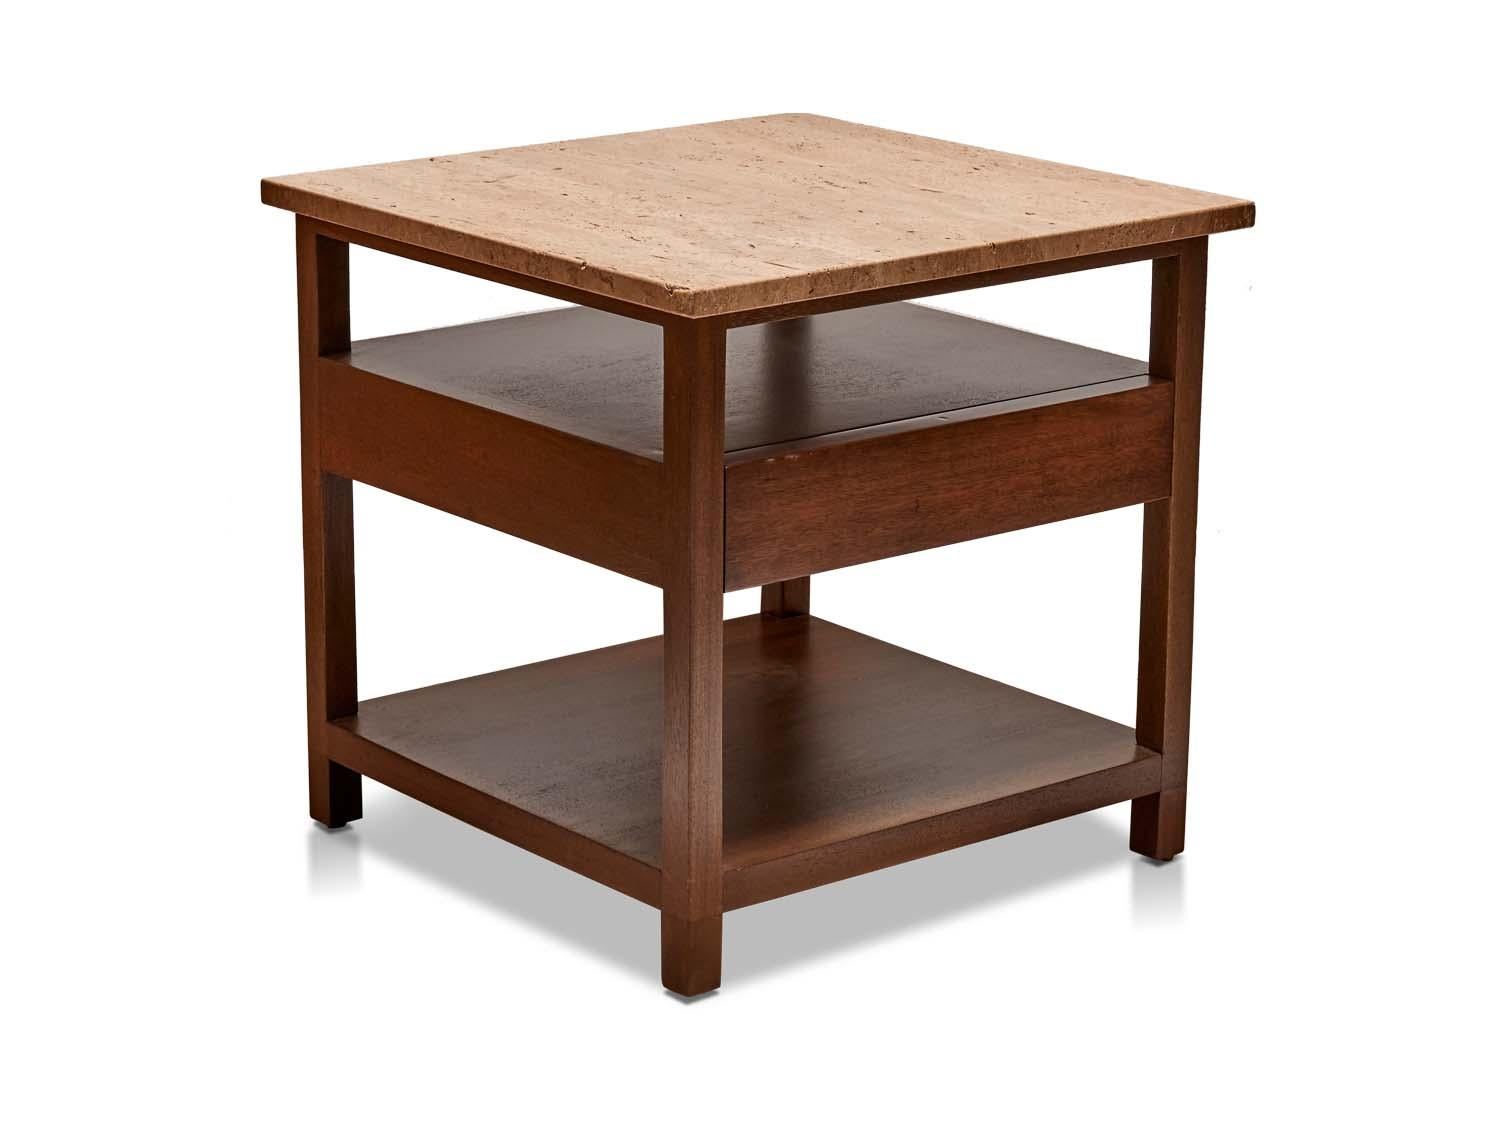 North American Travertine Topped Side Table by Harvey Probber Inc.